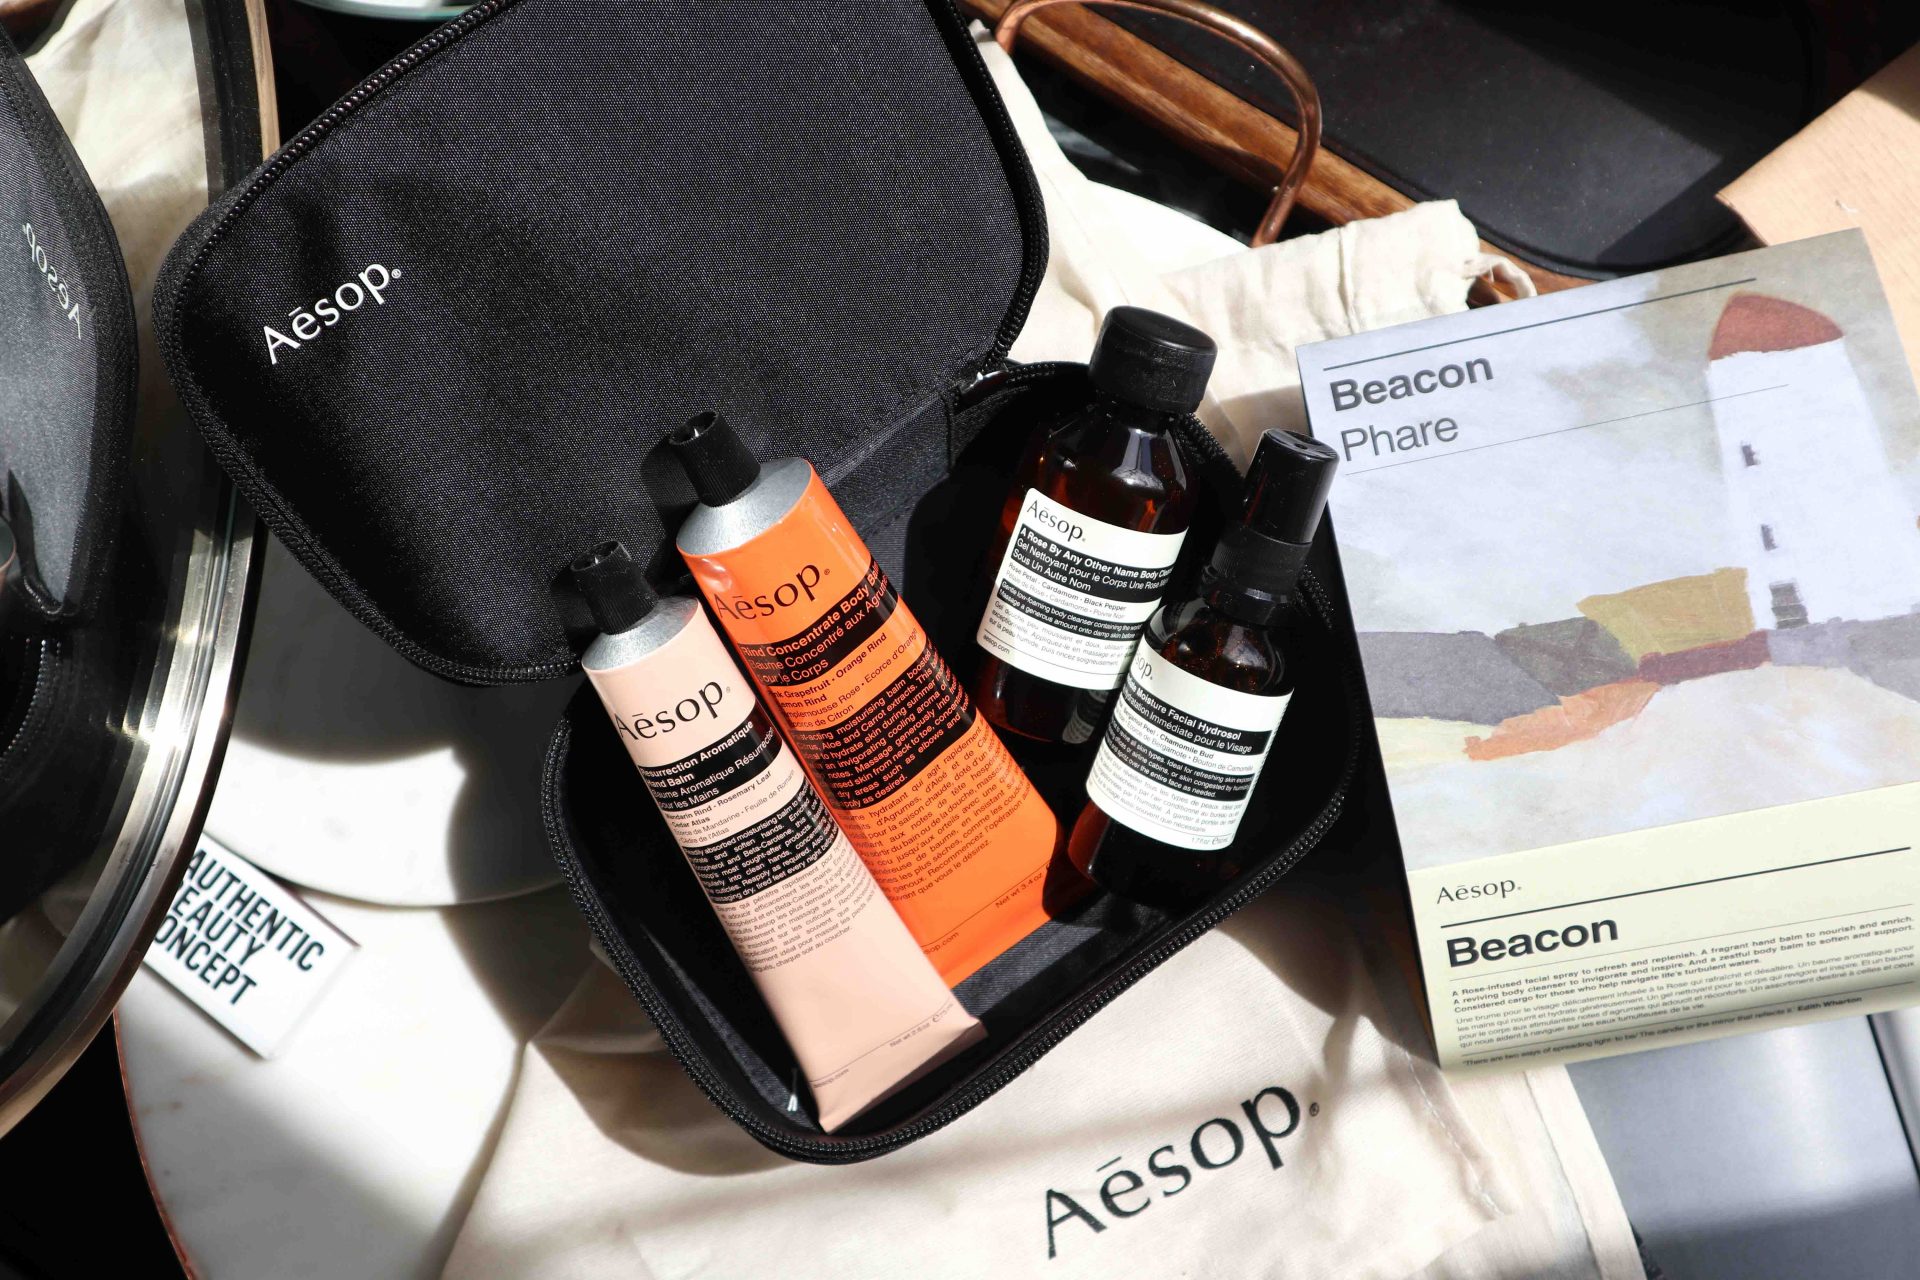 Pavilion KL - Aesop Aesop evolved their approach to design and packaging by  incorporating circular and sustainable solutions. When you shop at Aesop,  your items will be placed in a cotton drawstring